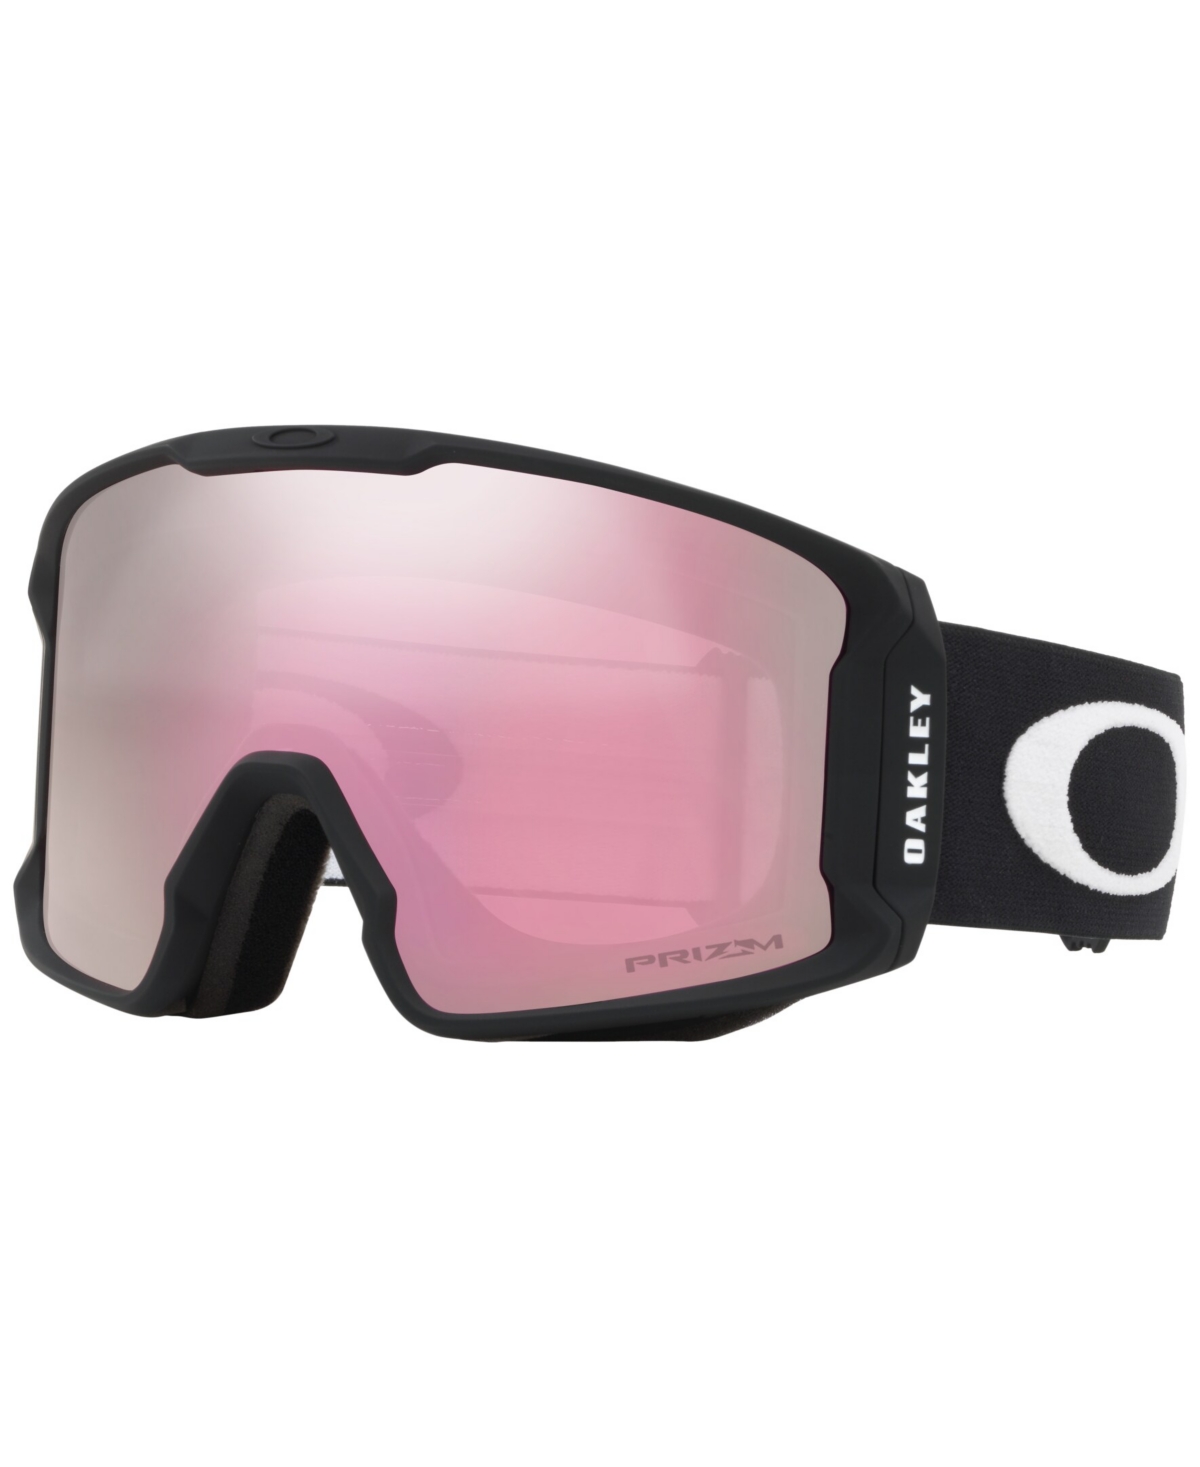 Oakley Unisex Line Miner L Snow Goggles, Oo7070-06 In Black